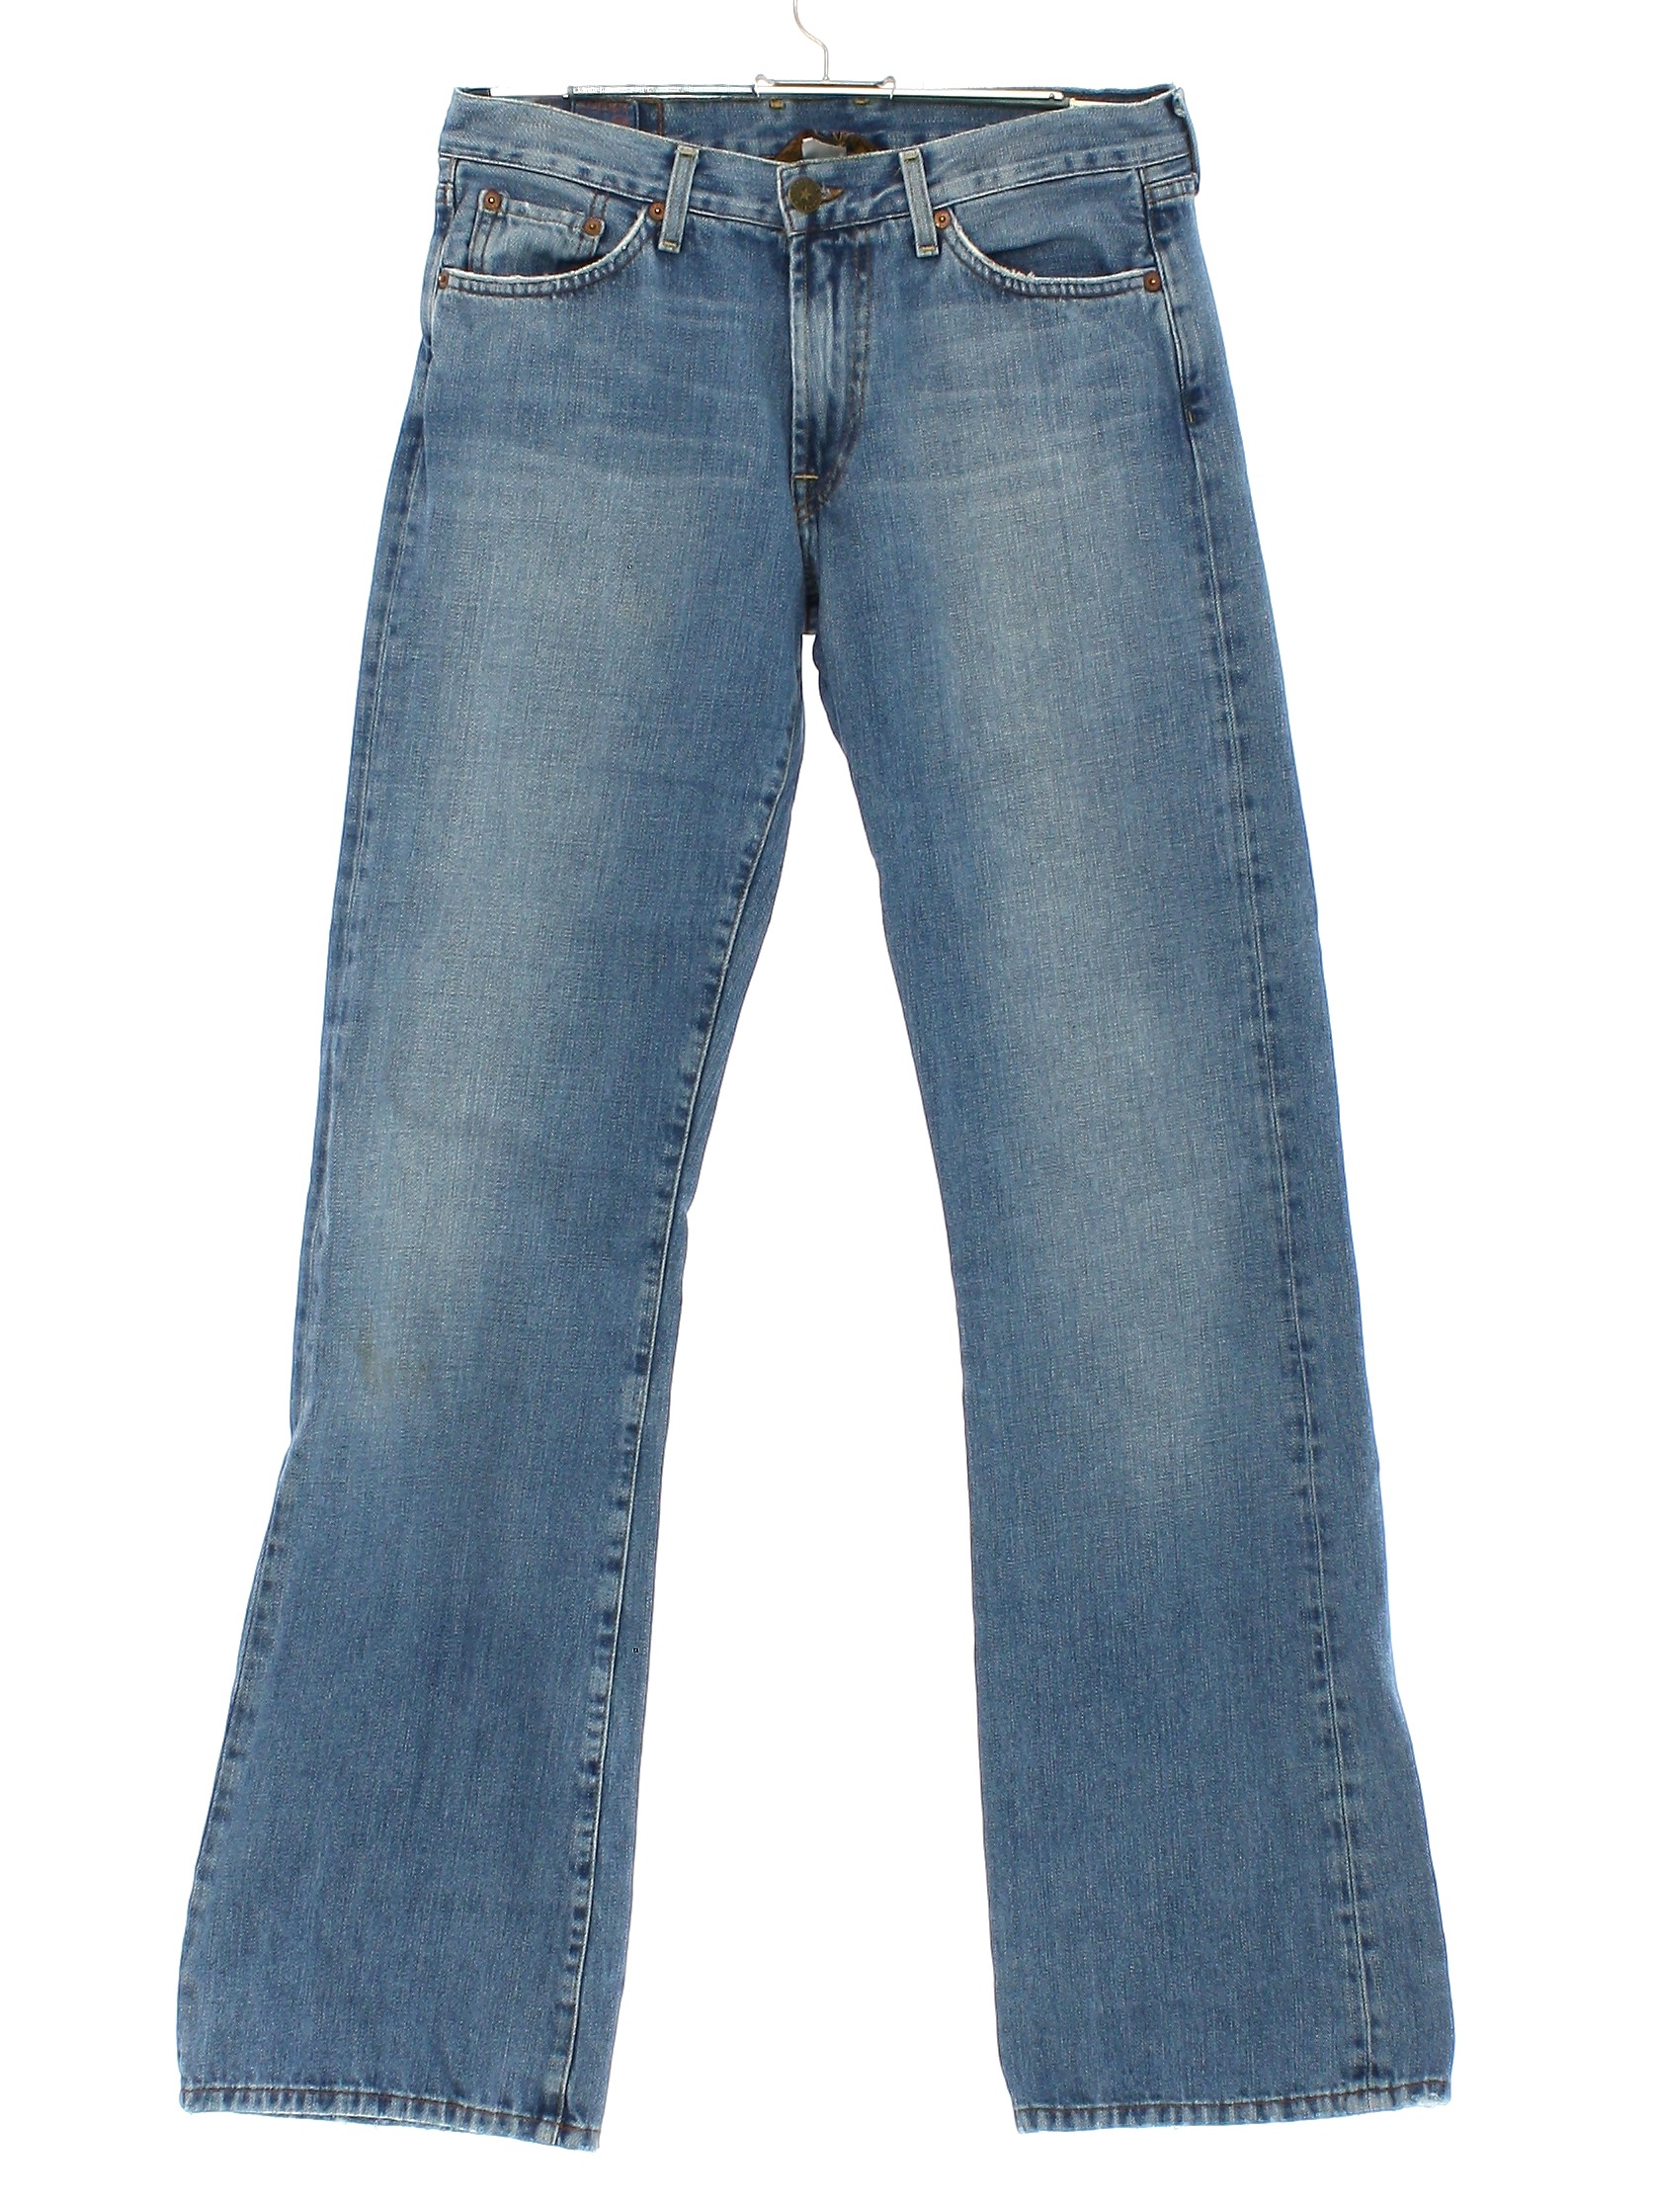 Flared Pants / Flares: 90s (Late y2k, 2007) -Lucky Brand Jeans, Made in ...